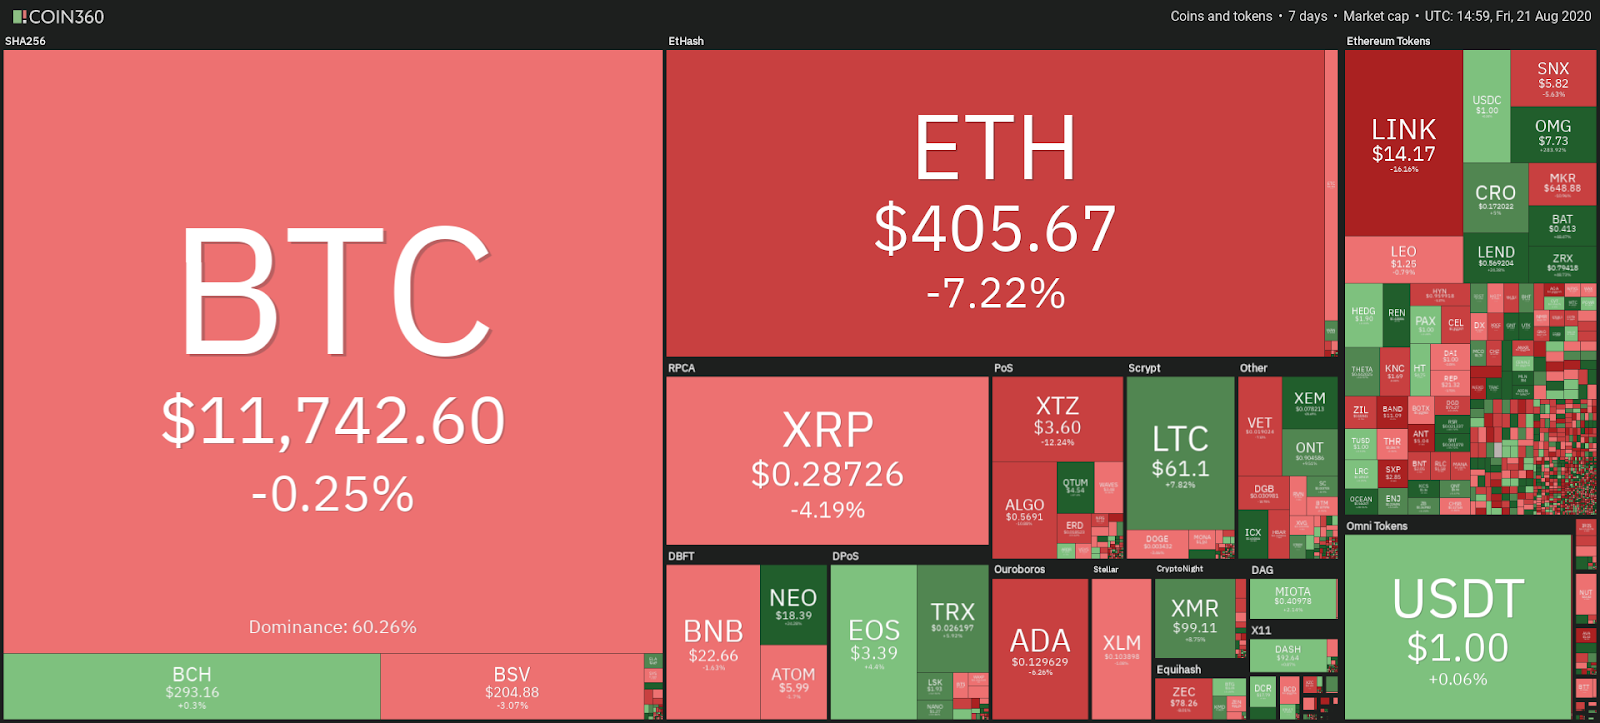 Cryptocurrency market weekly performance. Source: Coin360